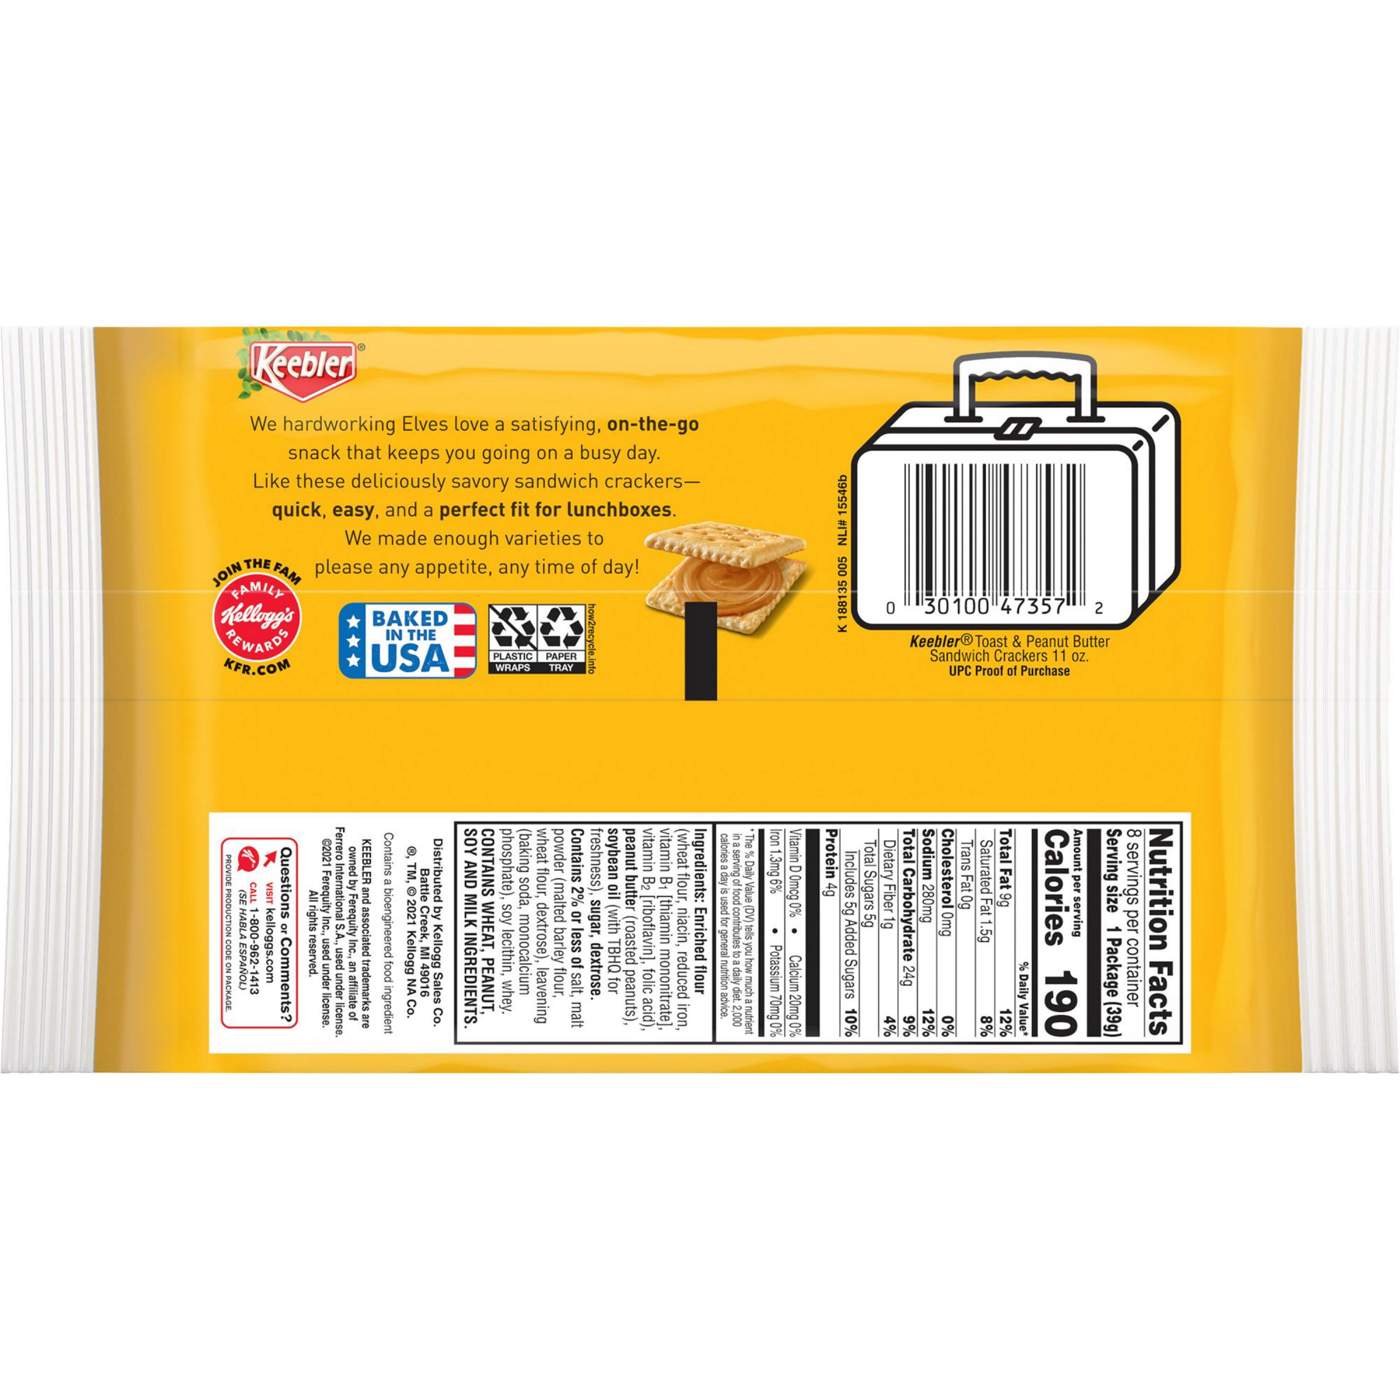 Keebler Toast and Peanut Butter Sandwich Crackers; image 4 of 4